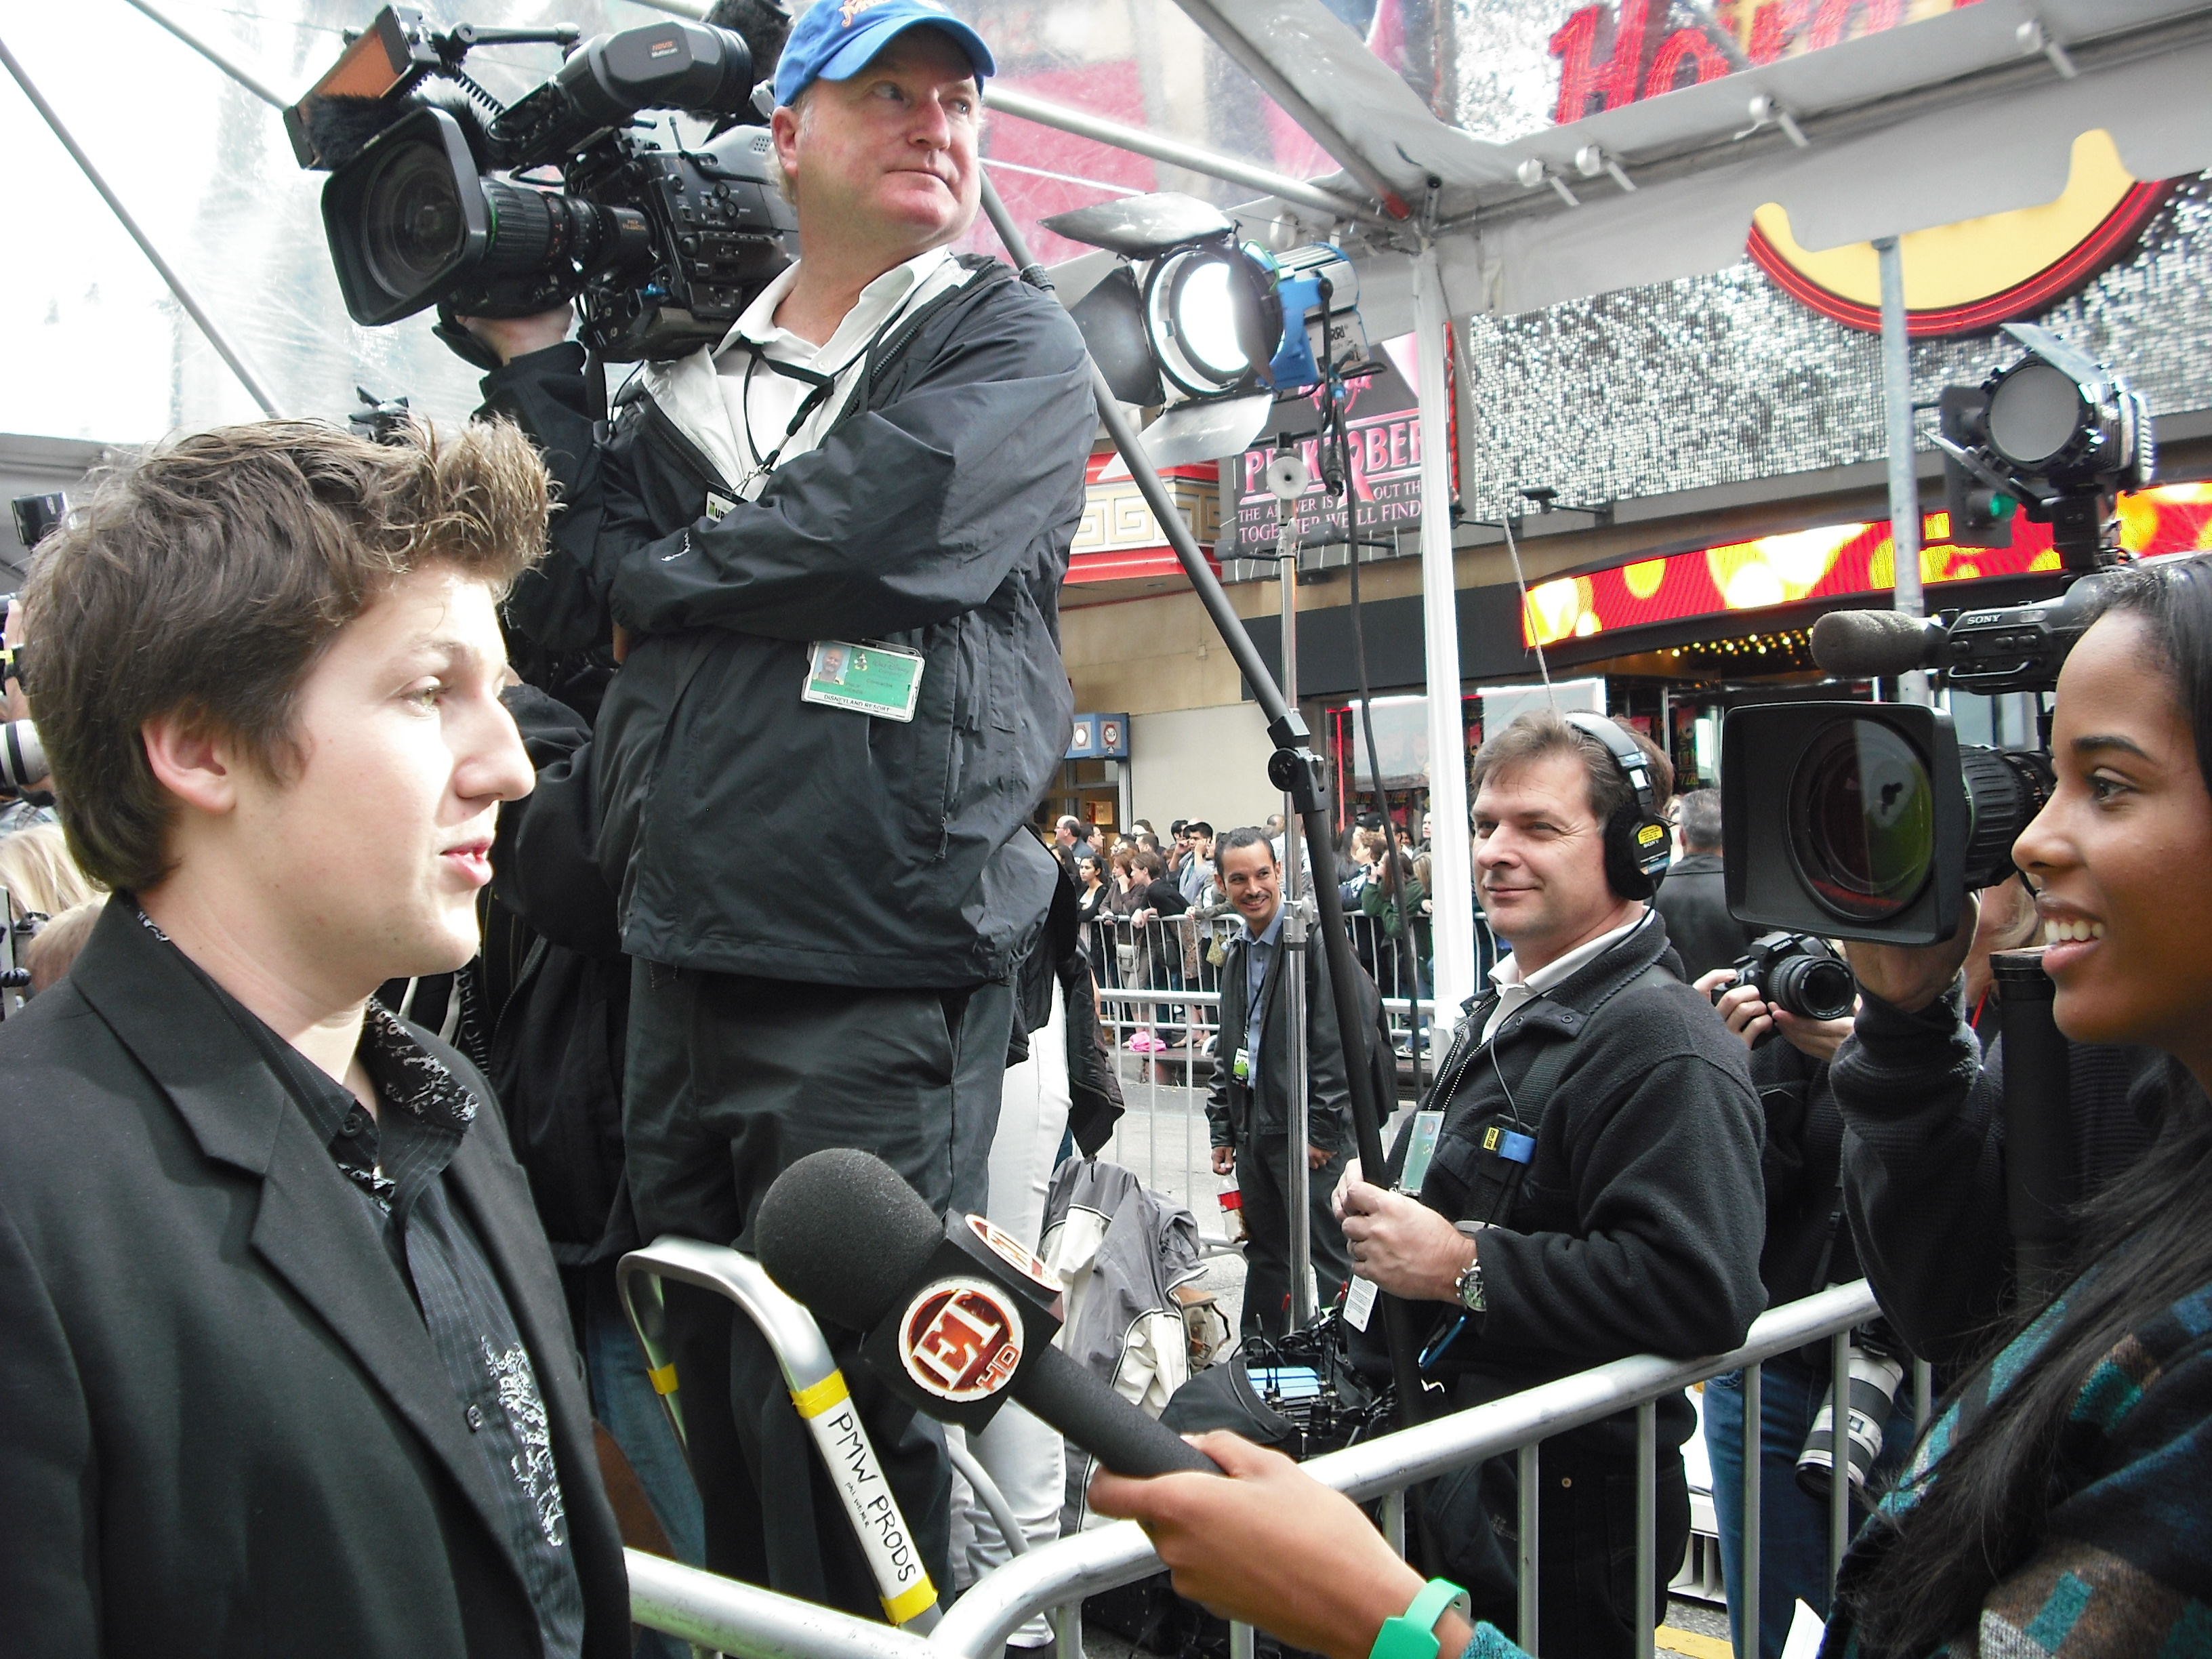 David getting interviewed by Entertainment Tonight on the Green Carpet at The Muppets World Premiere